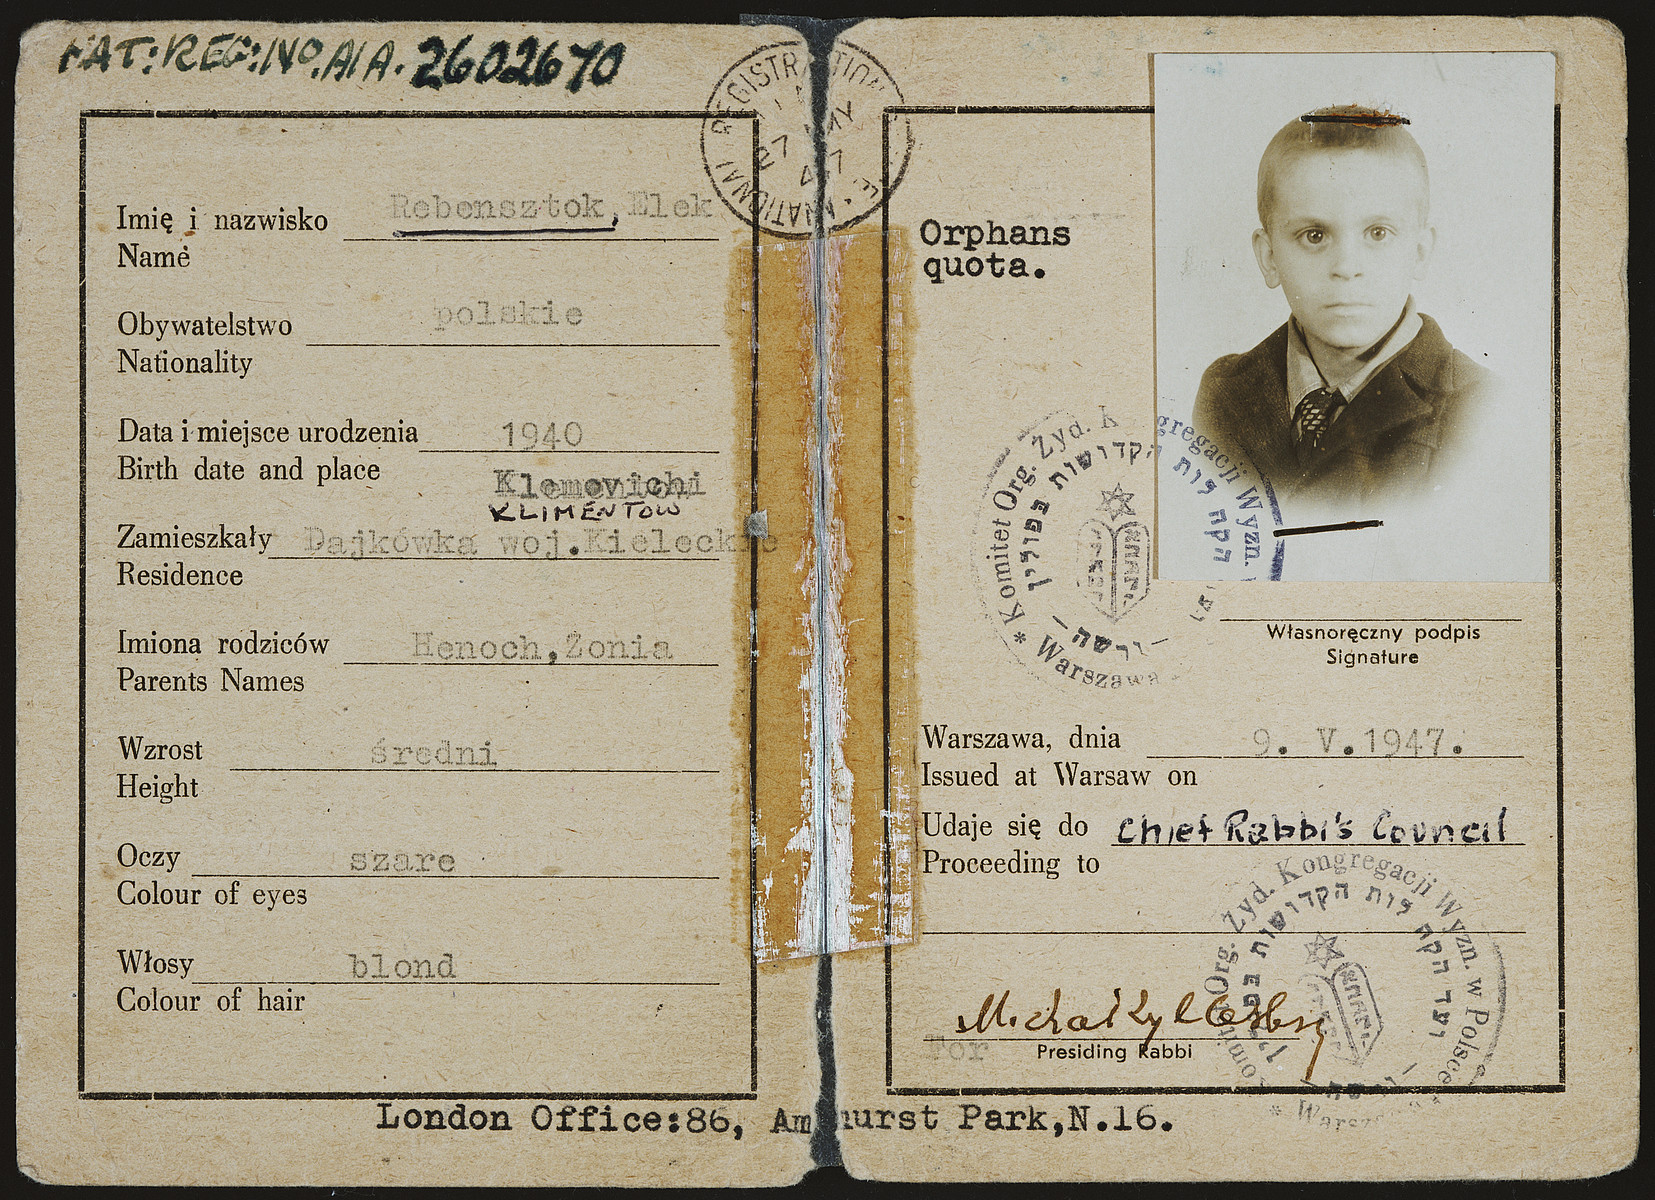 Identification card issued to Elek Rebensztok by the Central Council of Jewish Congregations of Poland and stamped by British immigration authorities allowing him to provisionally enter the country under the orphans' quota.

The conditions listed on the back side read, "The holder is permitted to land at Leith subject to the following condition namely that he/she registers at once with the police on attaining the age of sixteen years, that he/she does not enter any employment without consent of the Ministry of Labour and National Services and that he/she emigrate from the United Kingdom at the earliest opportunity.